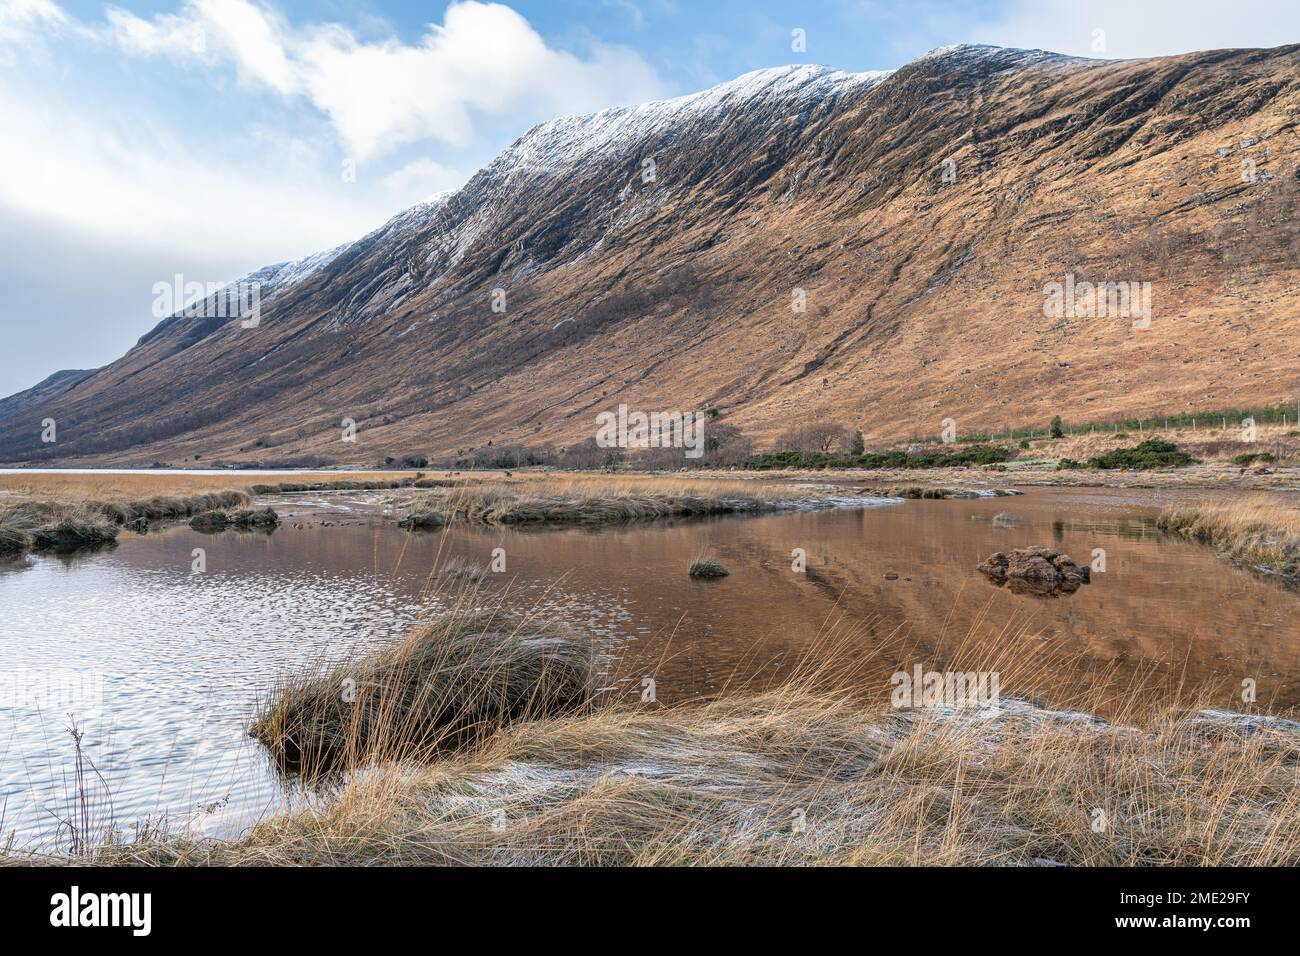 The meeting point of River Etive and the Loch Etive in the Highlands, Scotland Stock Photo